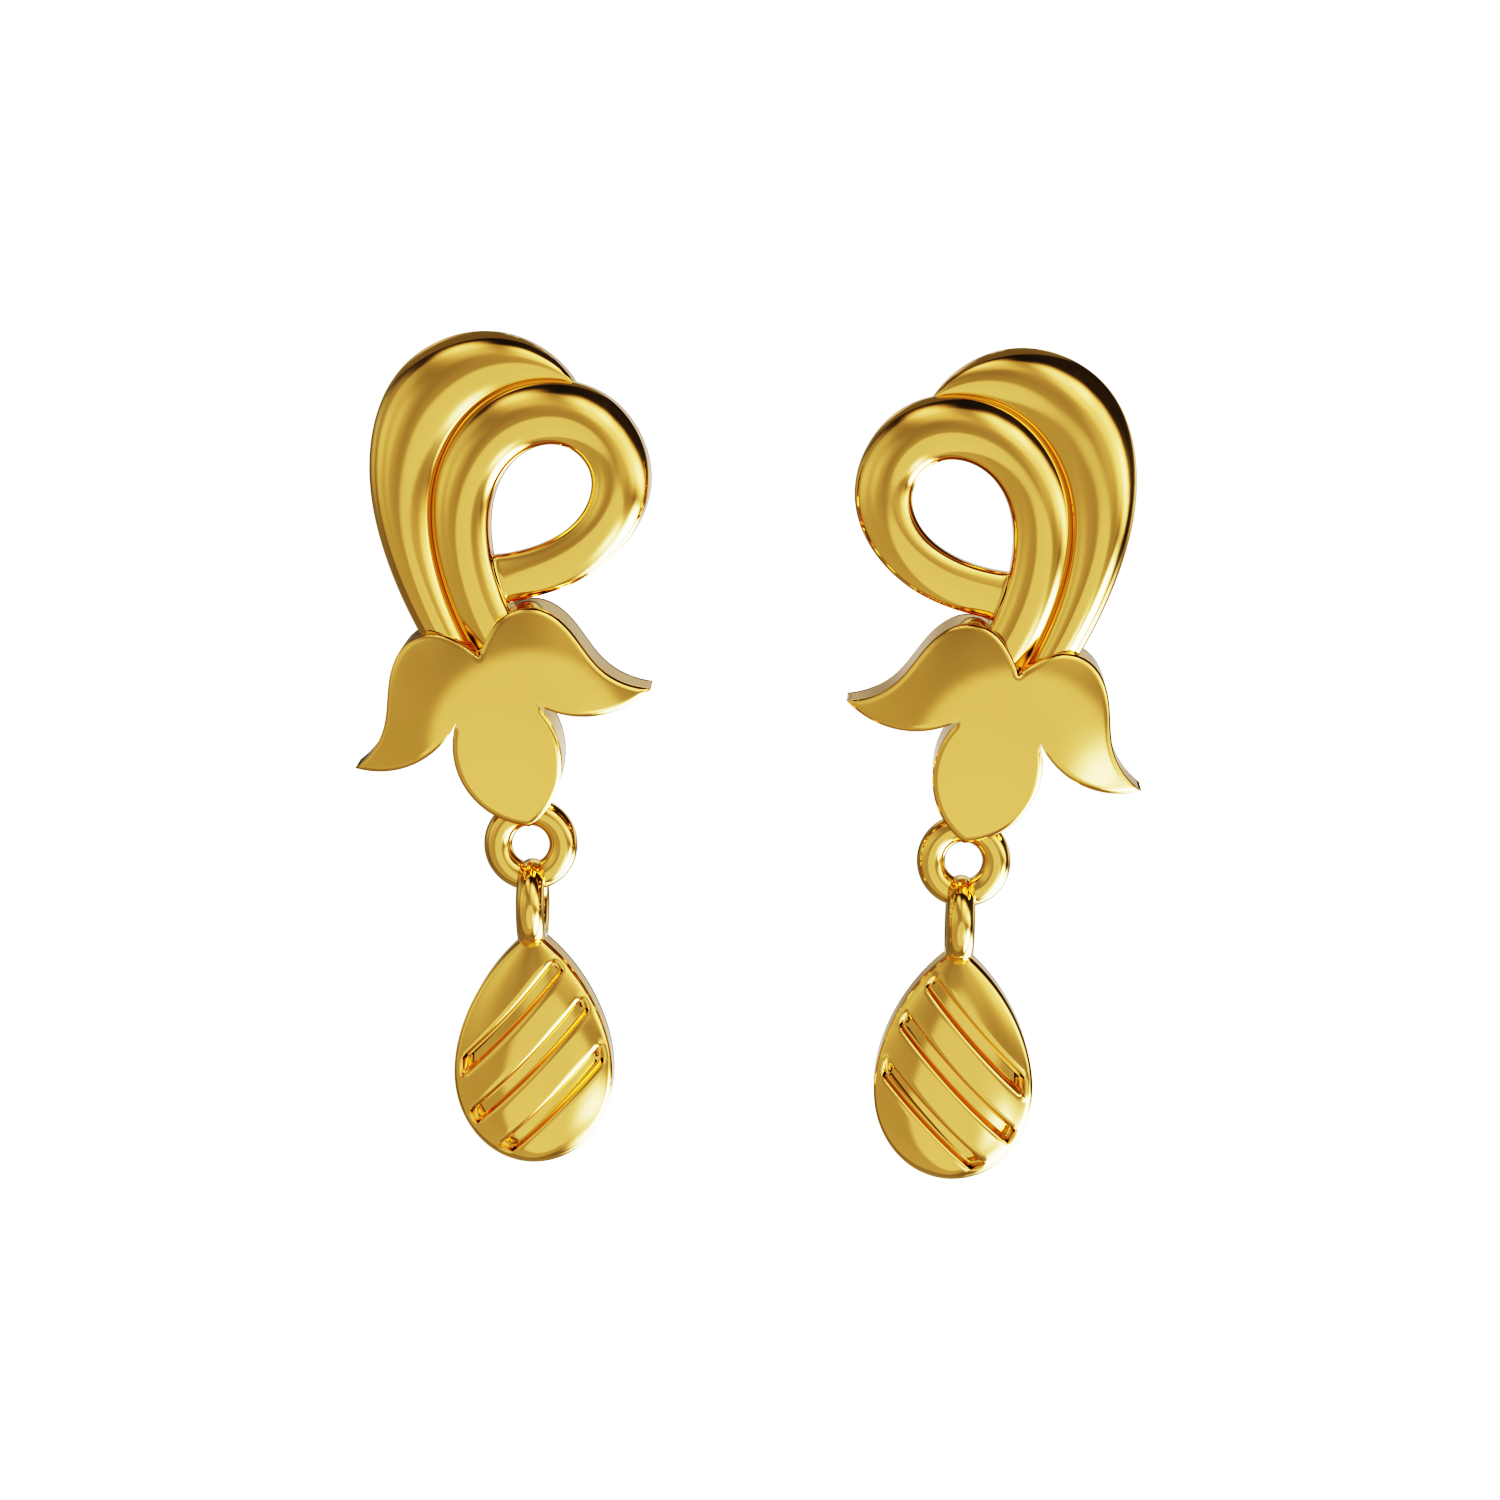 Buy South Indian Style Traditional Look Gold Design Short Earrings for Women